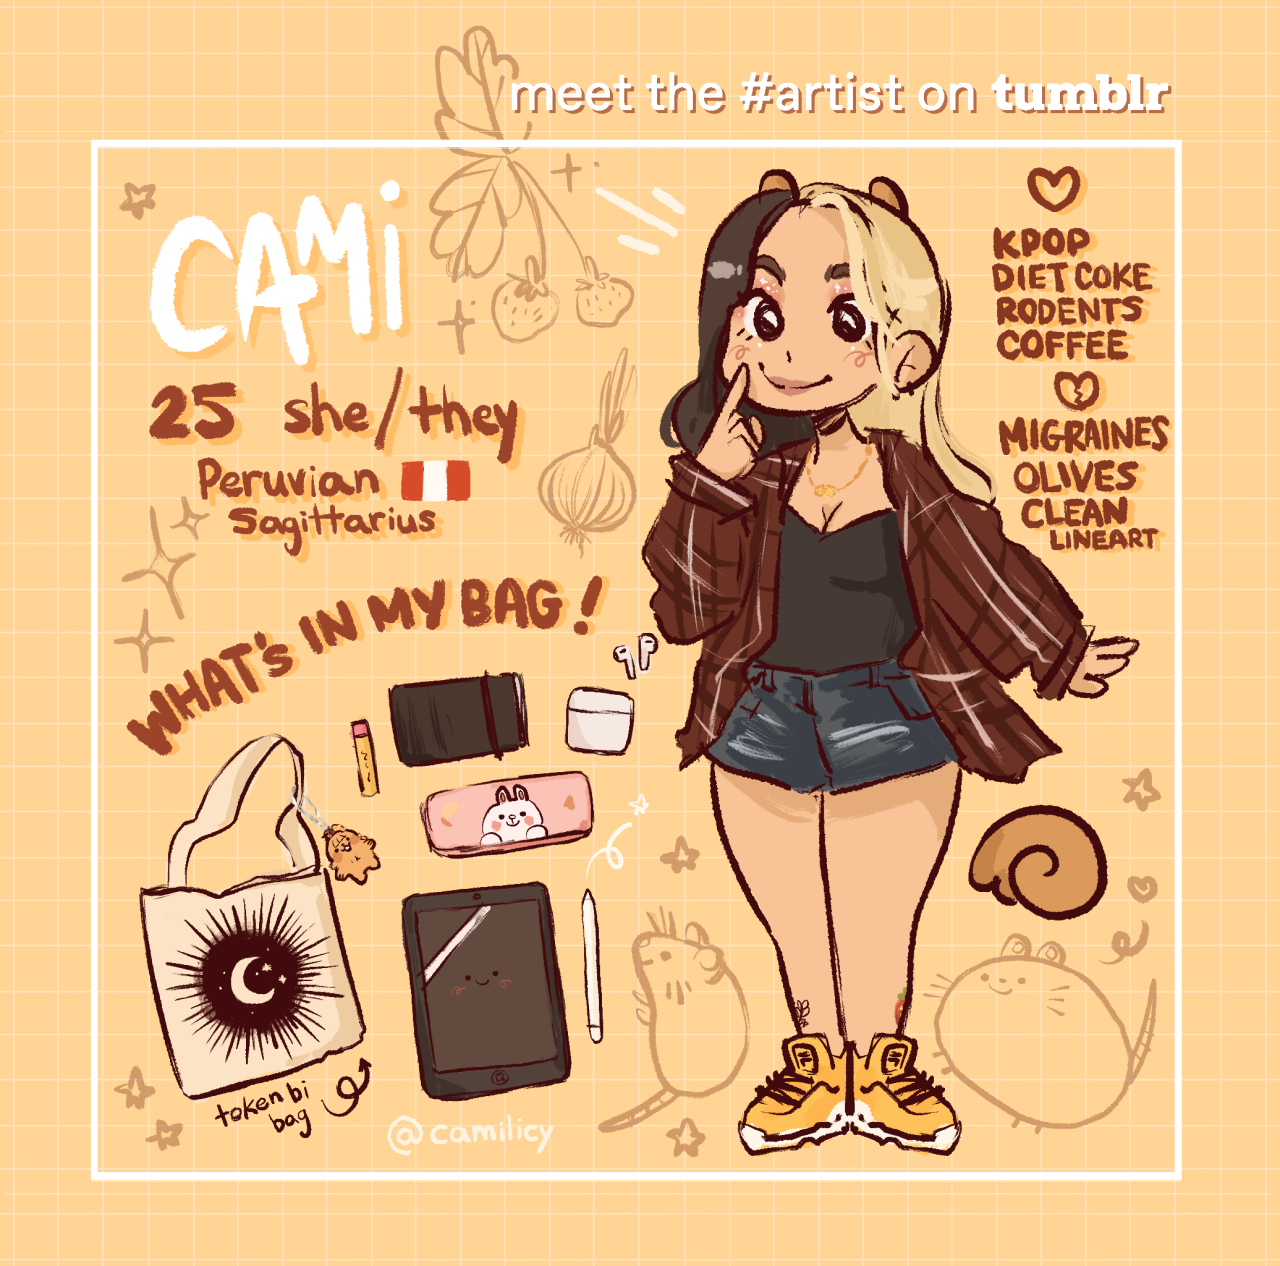 art:
“Meet the Artist: @camilicy“Hola! My name is Cami. I’m a Peruvian Freelance illustrator residing in the sunny lands of South Florida! I enjoy doodling silly animals and cute stuff using lots of warm colors like yellows and browns. Aside from...